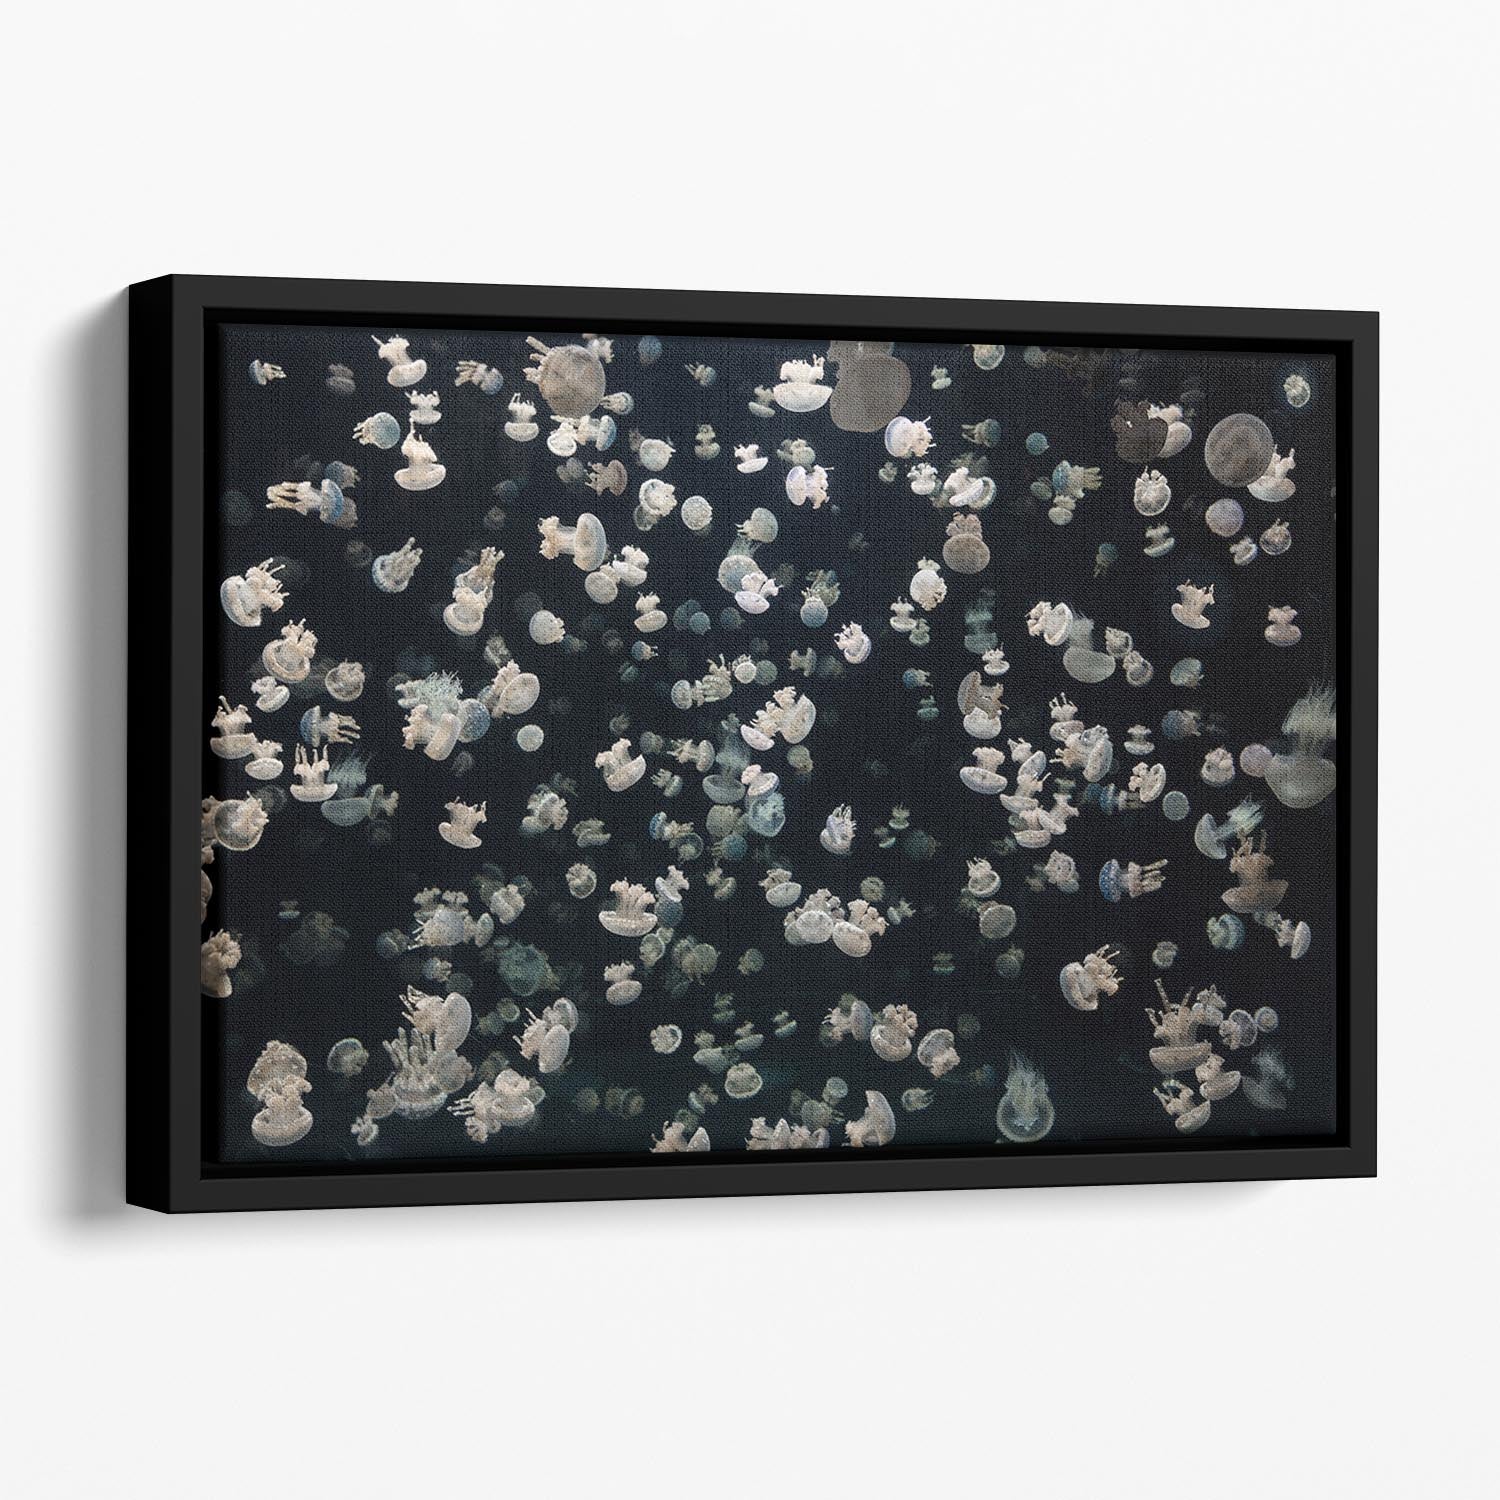 Just Some Jellies Floating Framed Canvas - Canvas Art Rocks - 1